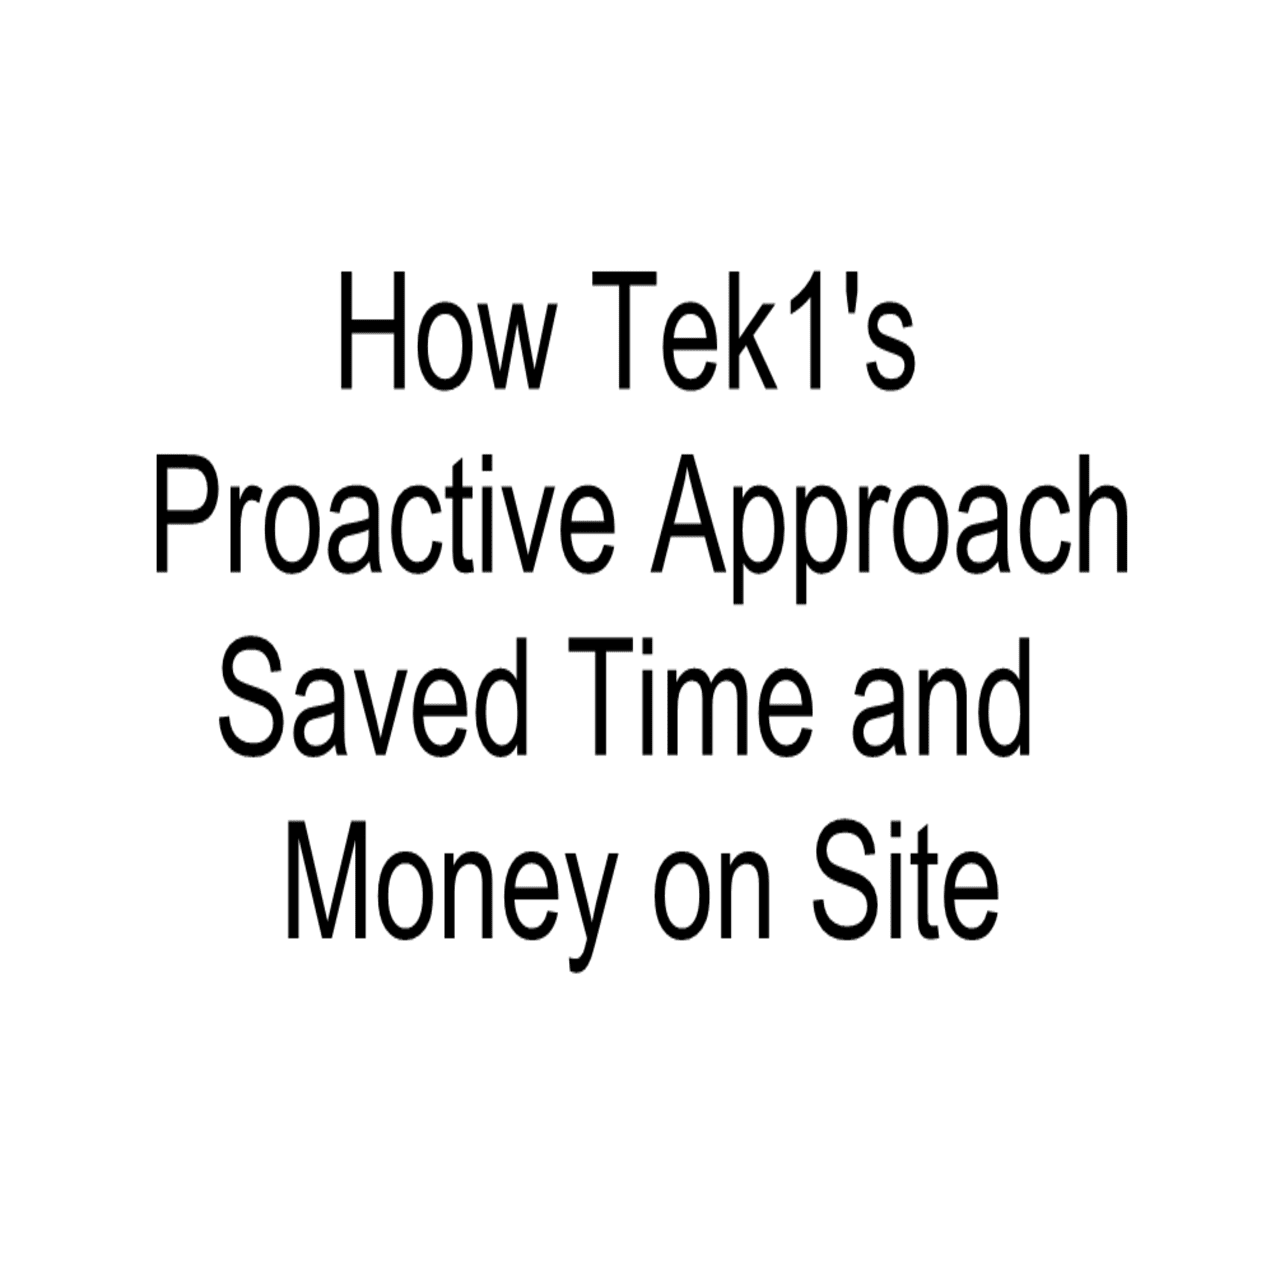 How Tek1’s Proactive Approach Saved Time and Money on Site